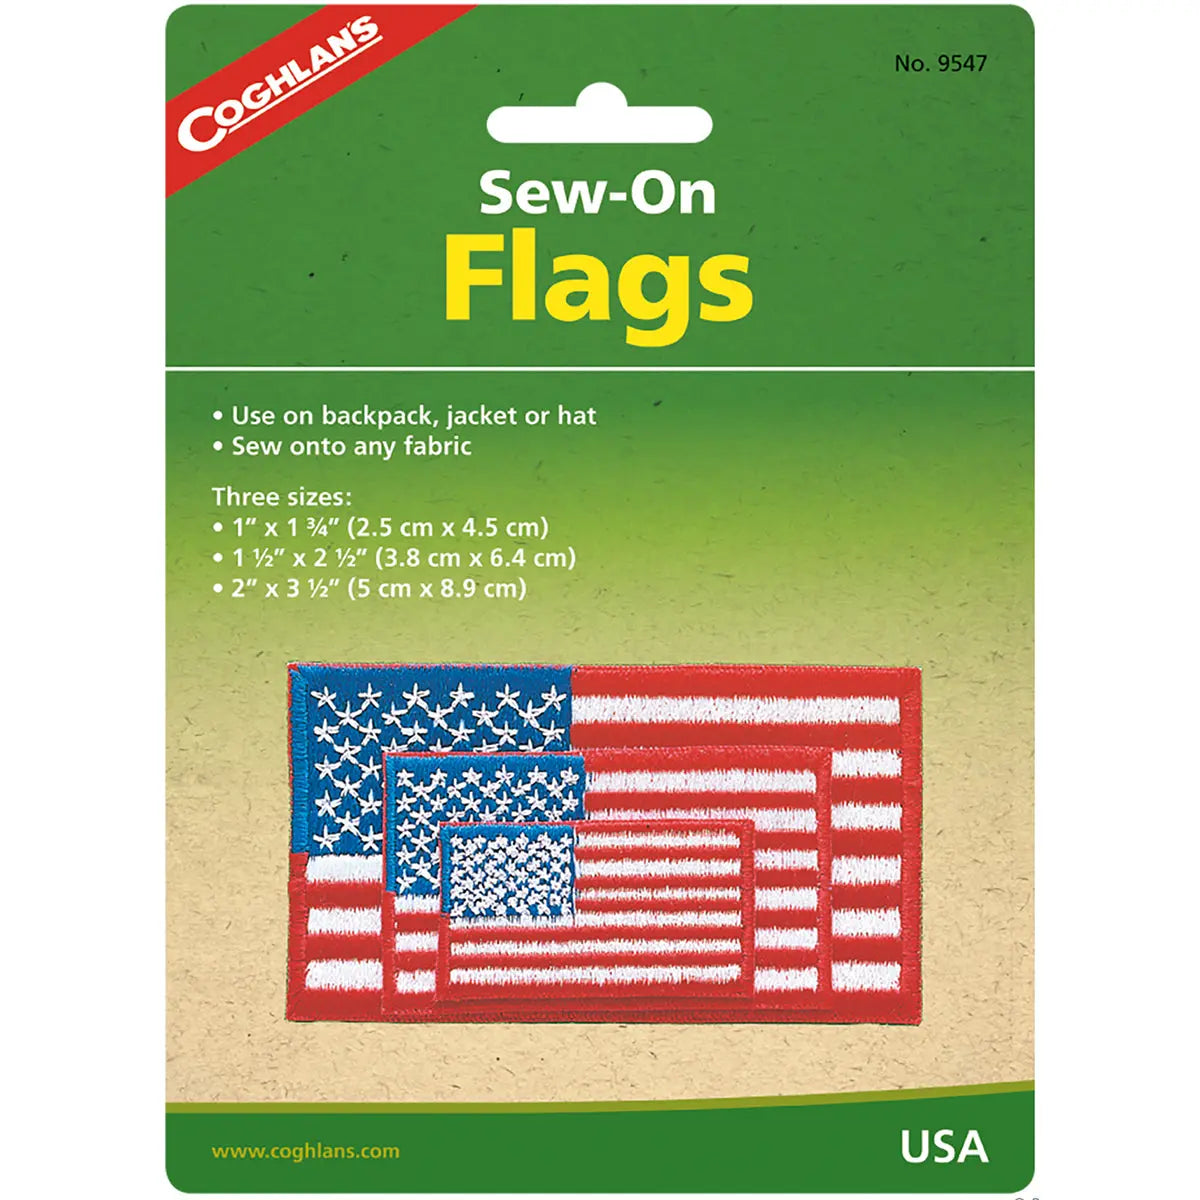 Coghlan's Sew-On Flags, USA, Sew to any Fabric, Backpack, Tent, Jacket, Hat Coghlan's